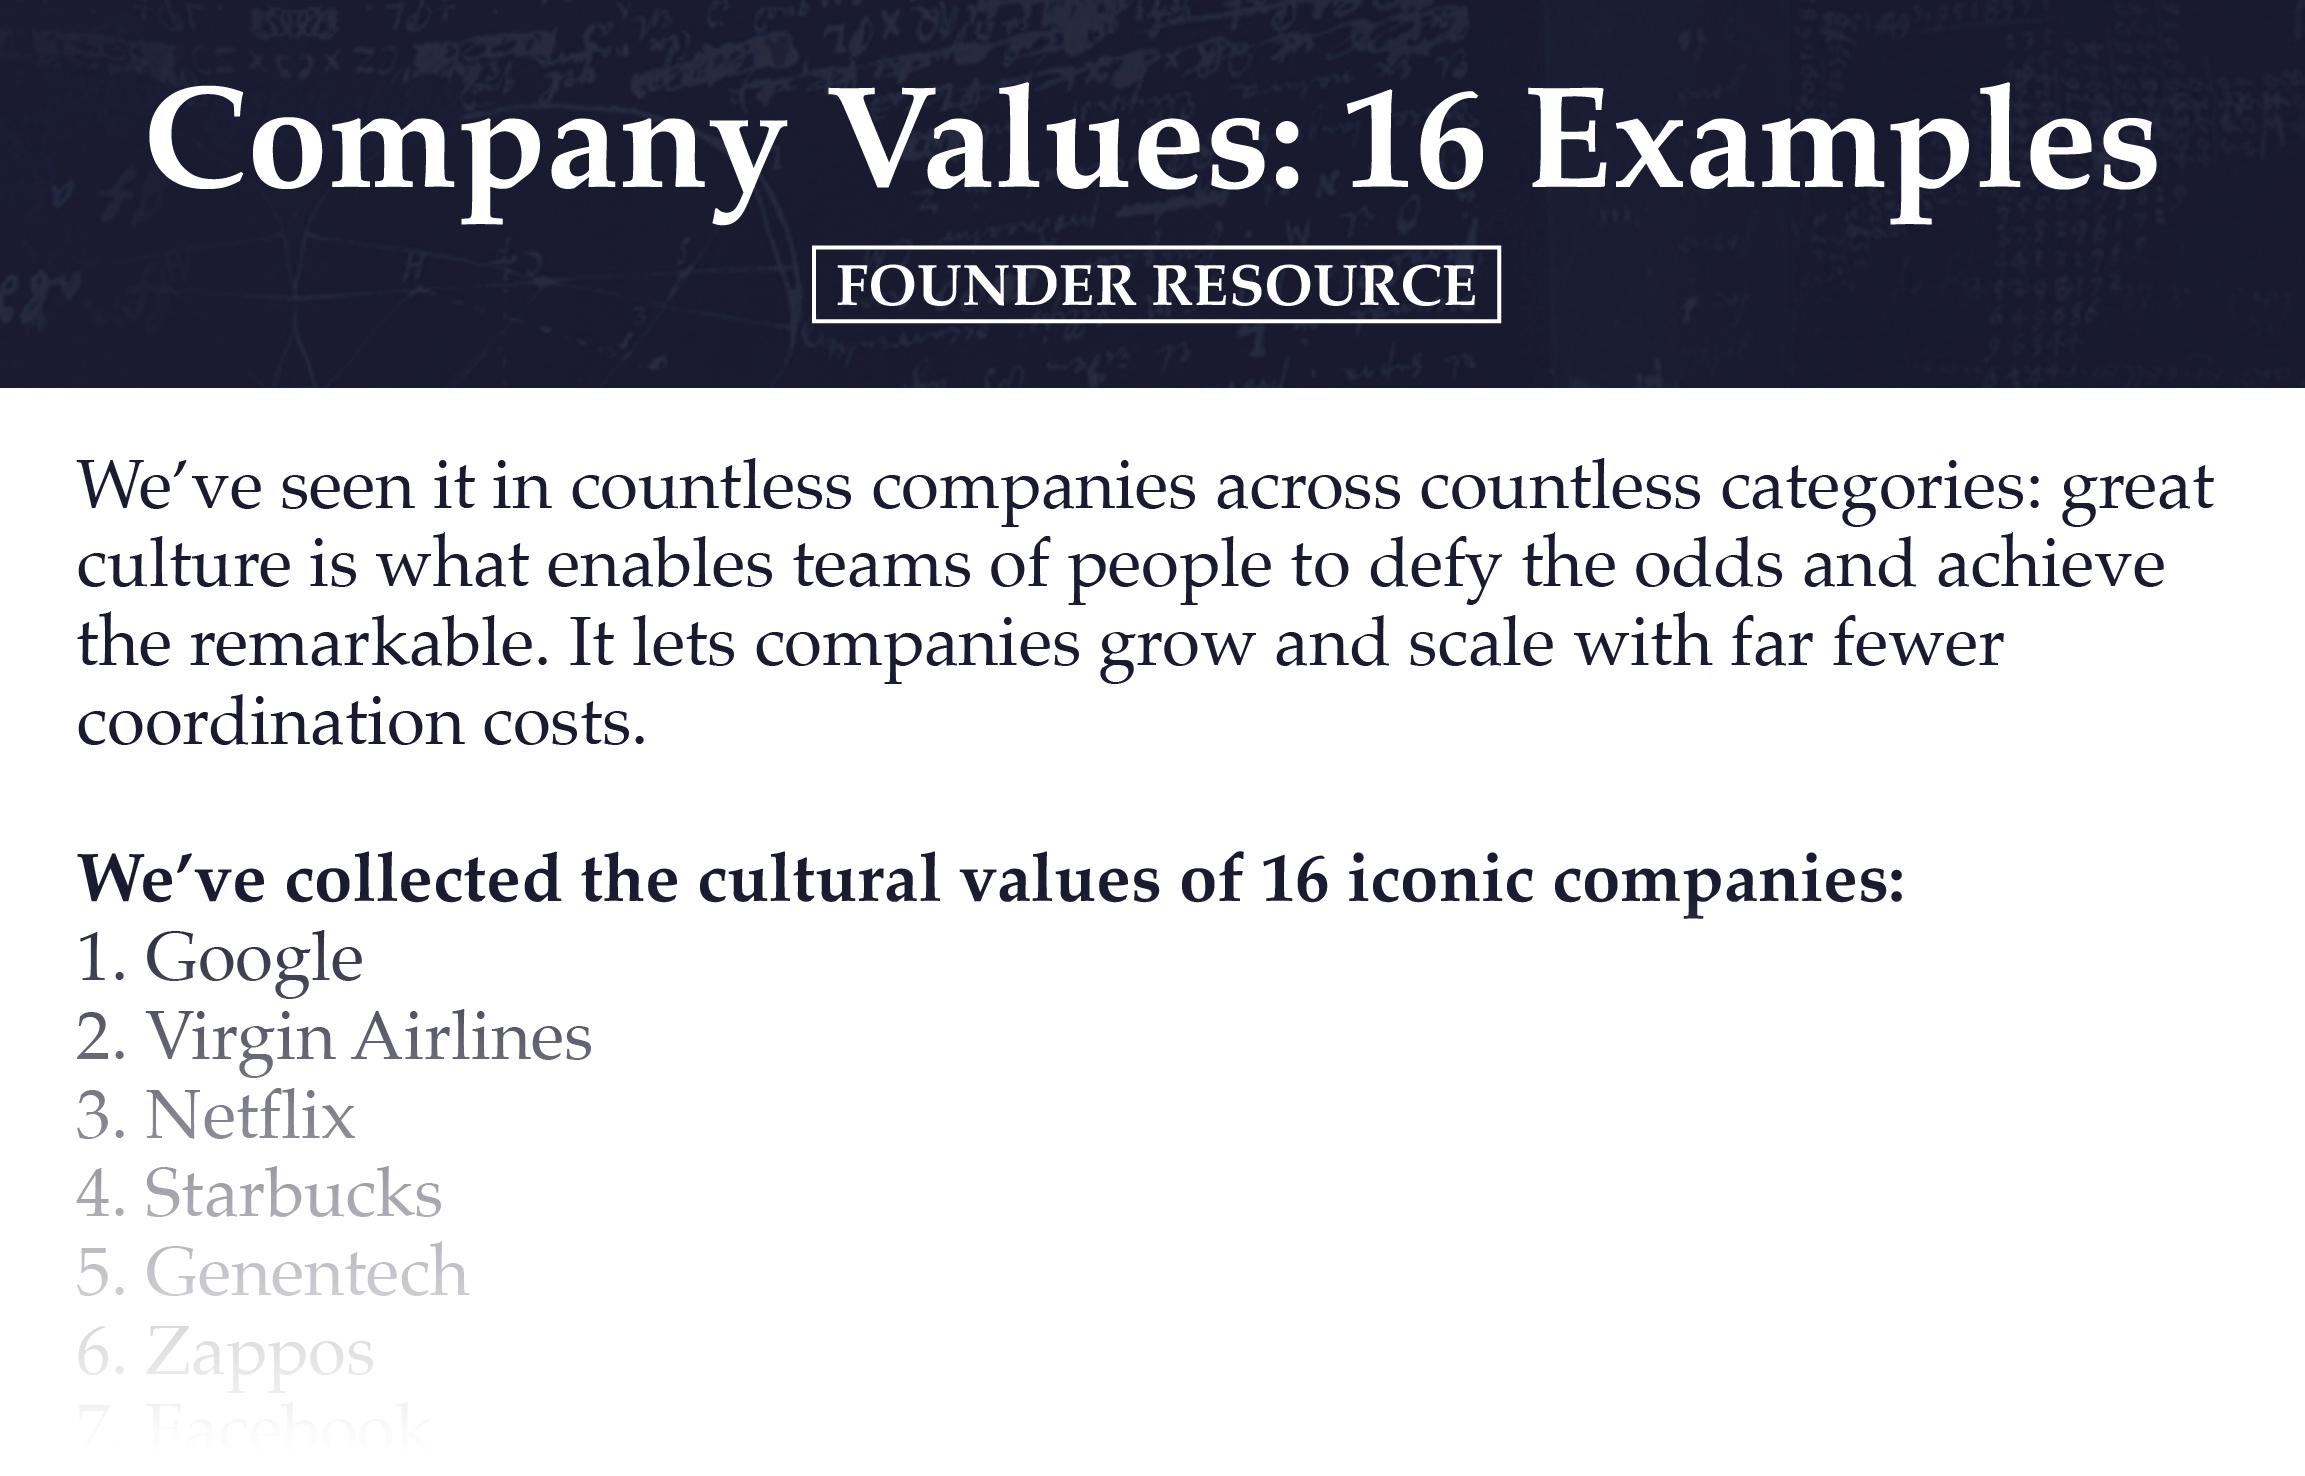 Company Values: 16 Examples - Content Upgrade